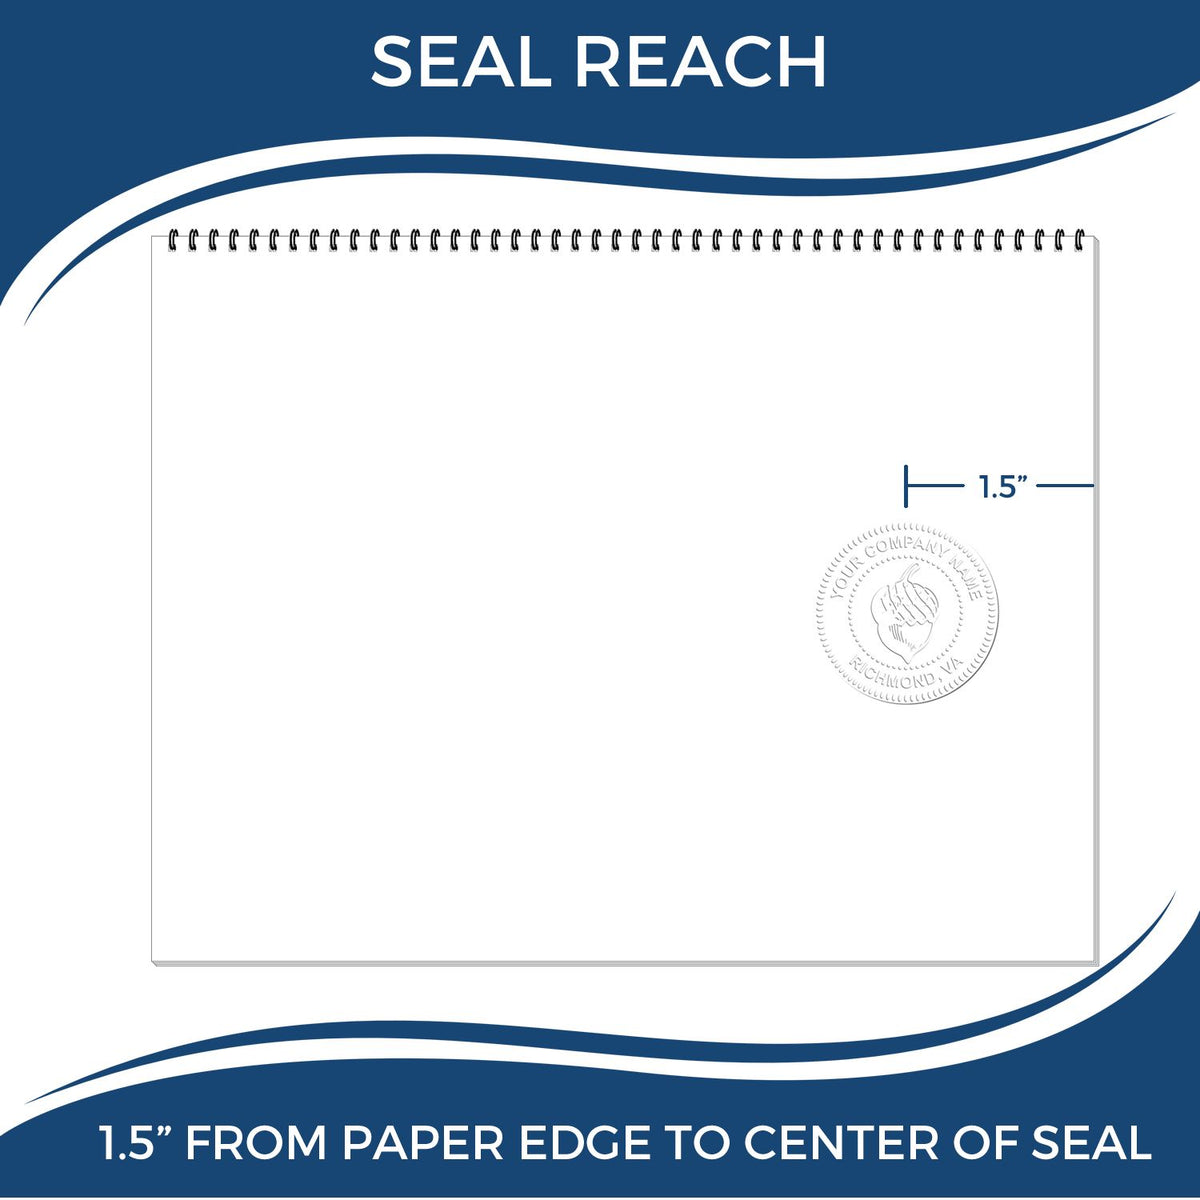 An infographic showing the seal reach which is represented by a ruler and a miniature seal image of the Gift Connecticut Geologist Seal